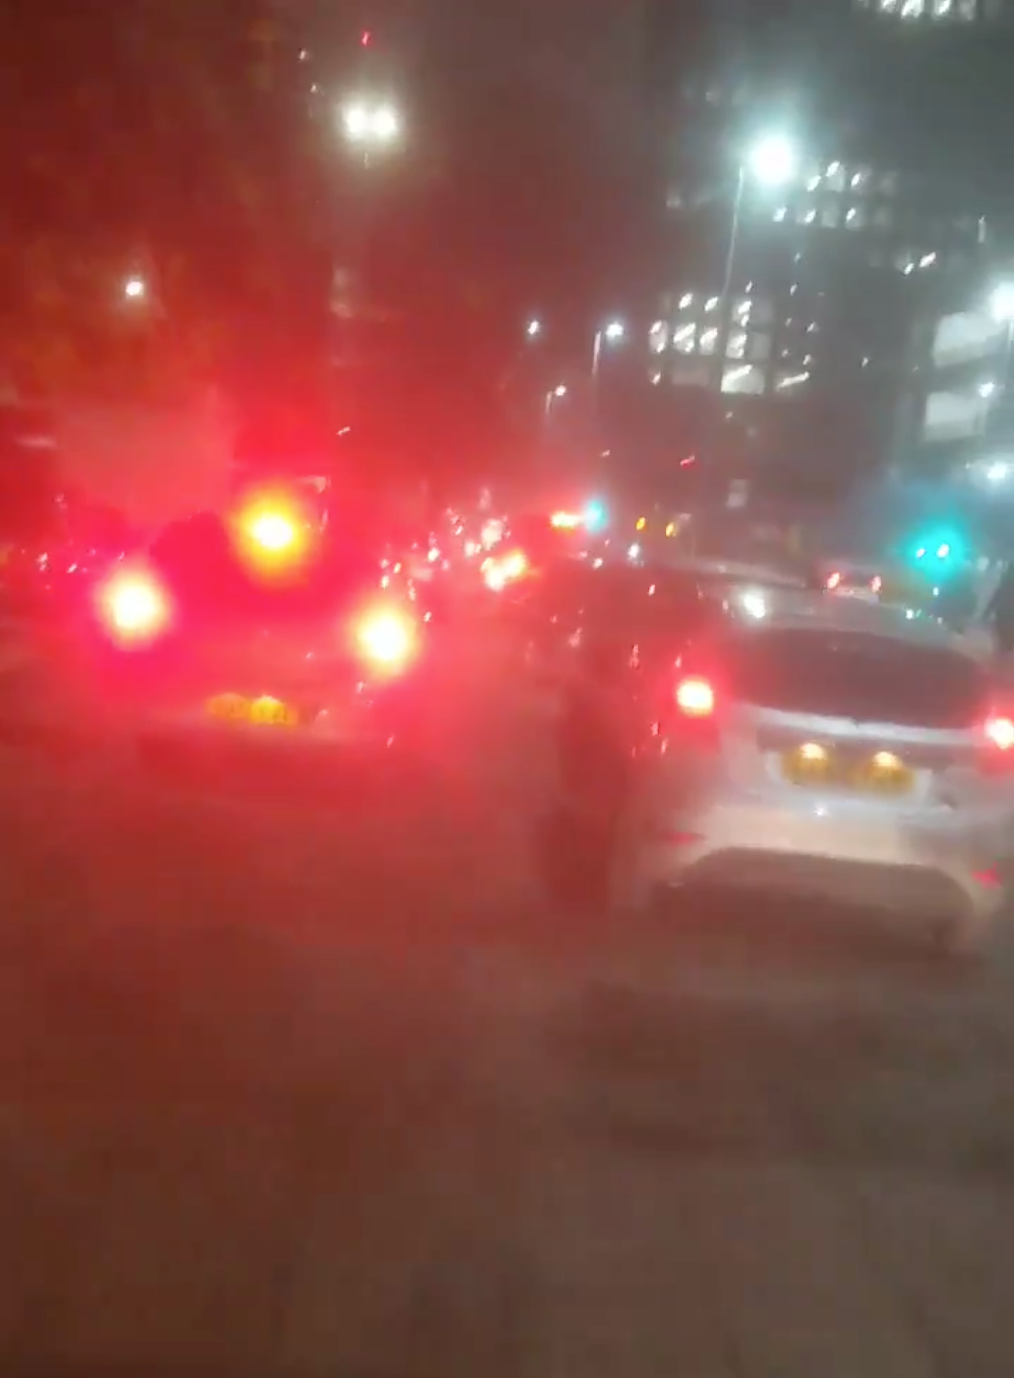 Furious cyclist shares video of traffic jam spilling onto city centre pavement, The Manc